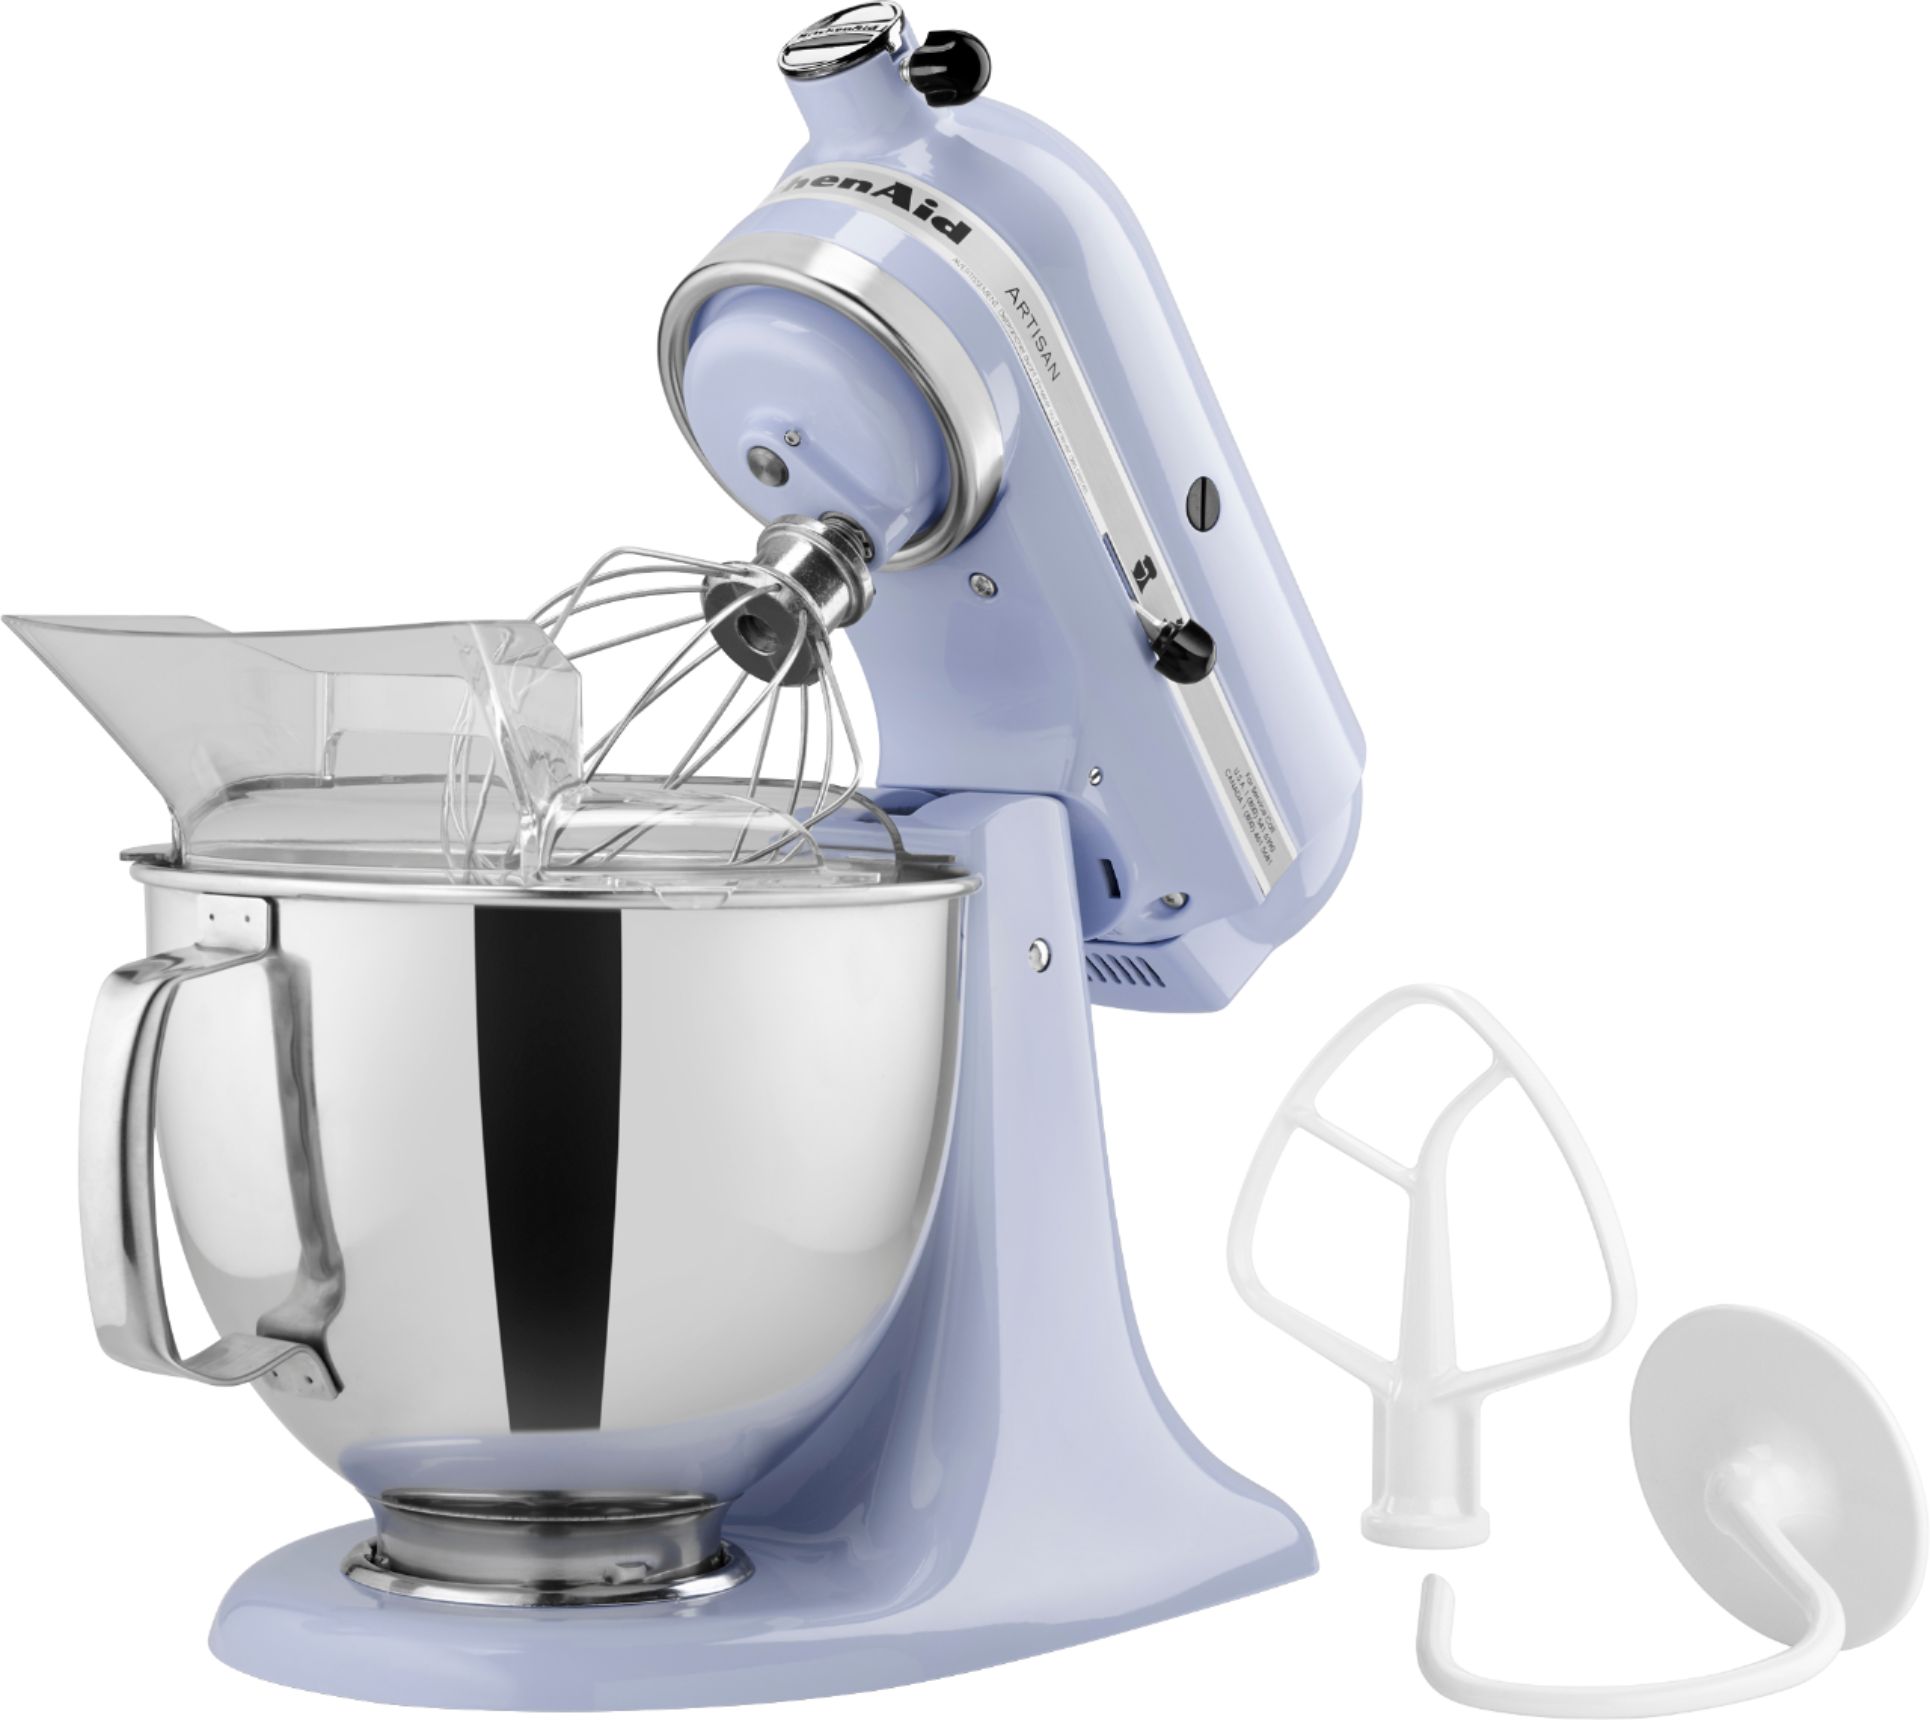 KitchenAid Mixer ksm150ps In Original Box In Wallingford - household items  - by owner - housewares sale - craigslist